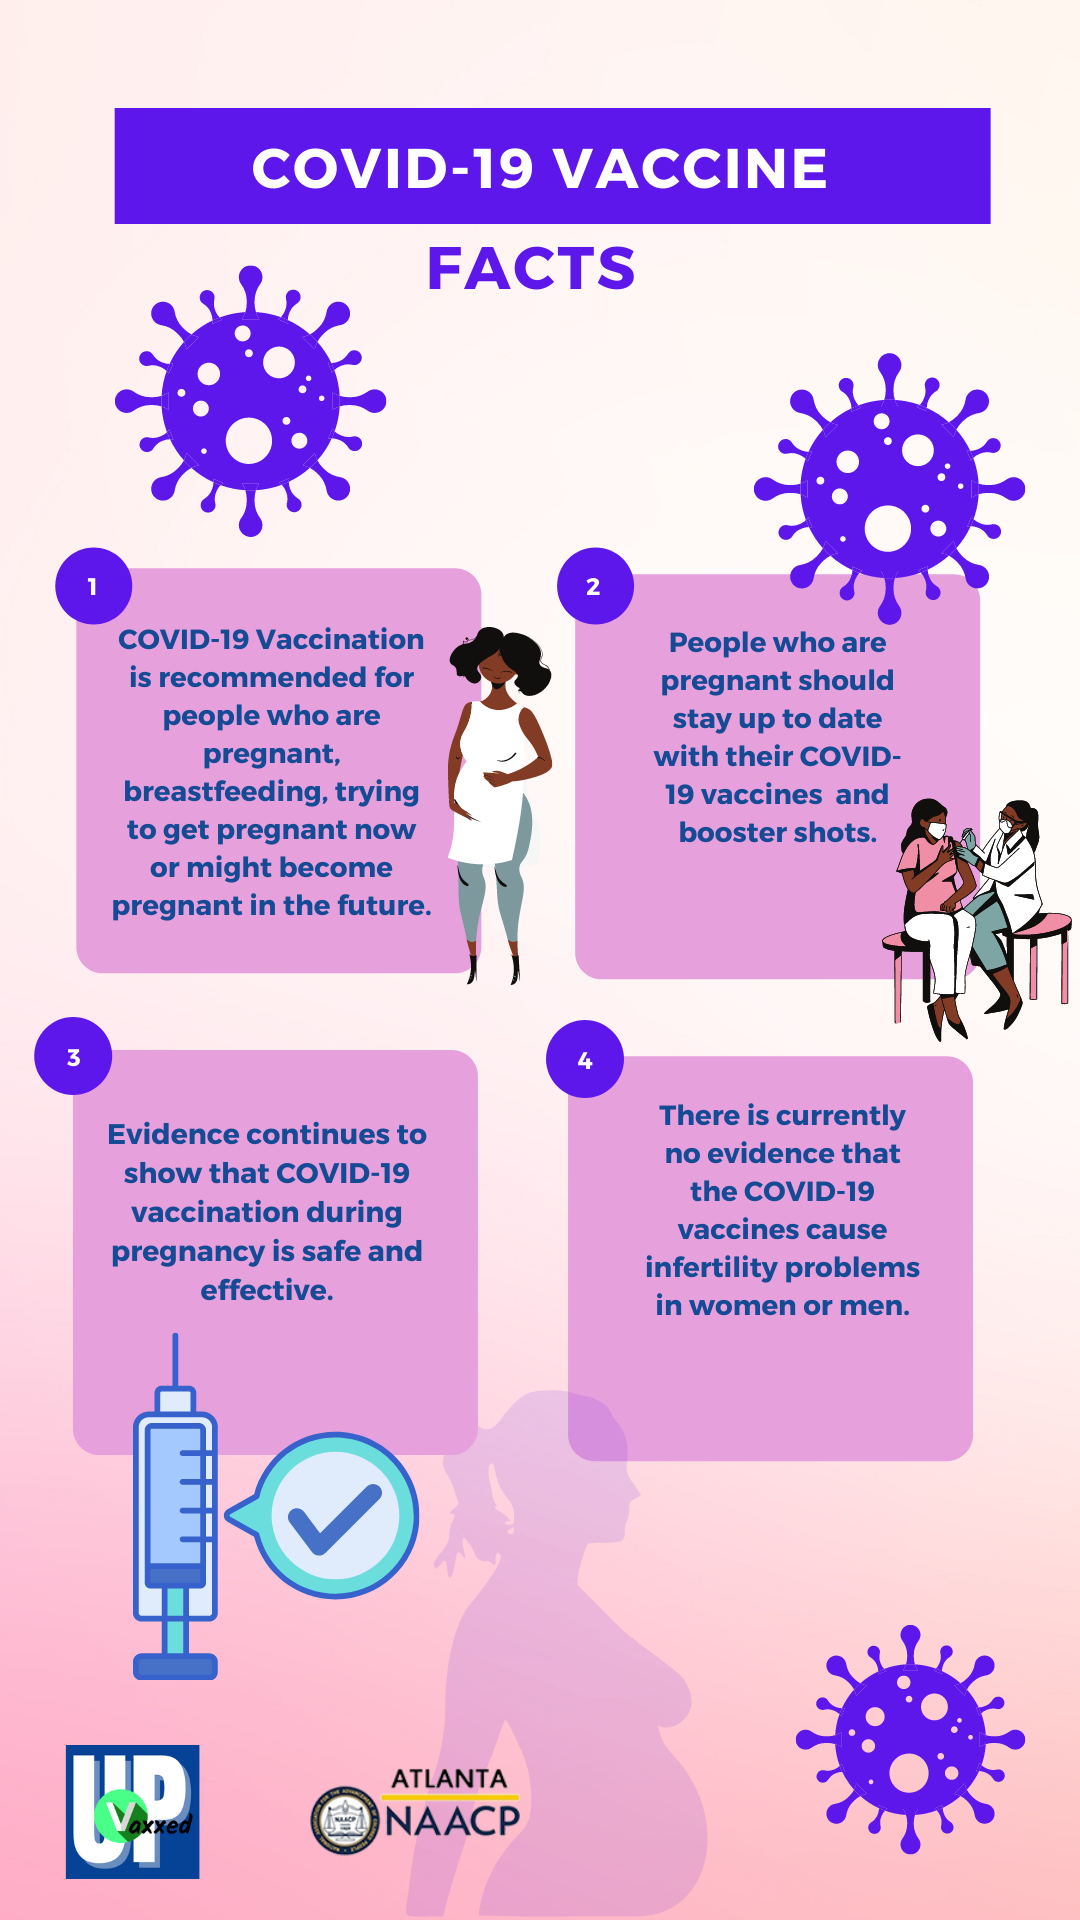 Titled "COVID-19 Vaccine Facts" with 4 boxes containing facts about the vaccine related to pregnancy. Includes cartoon images of a Black pregnant woman and a pregnant woman getting a shot from a doctor.